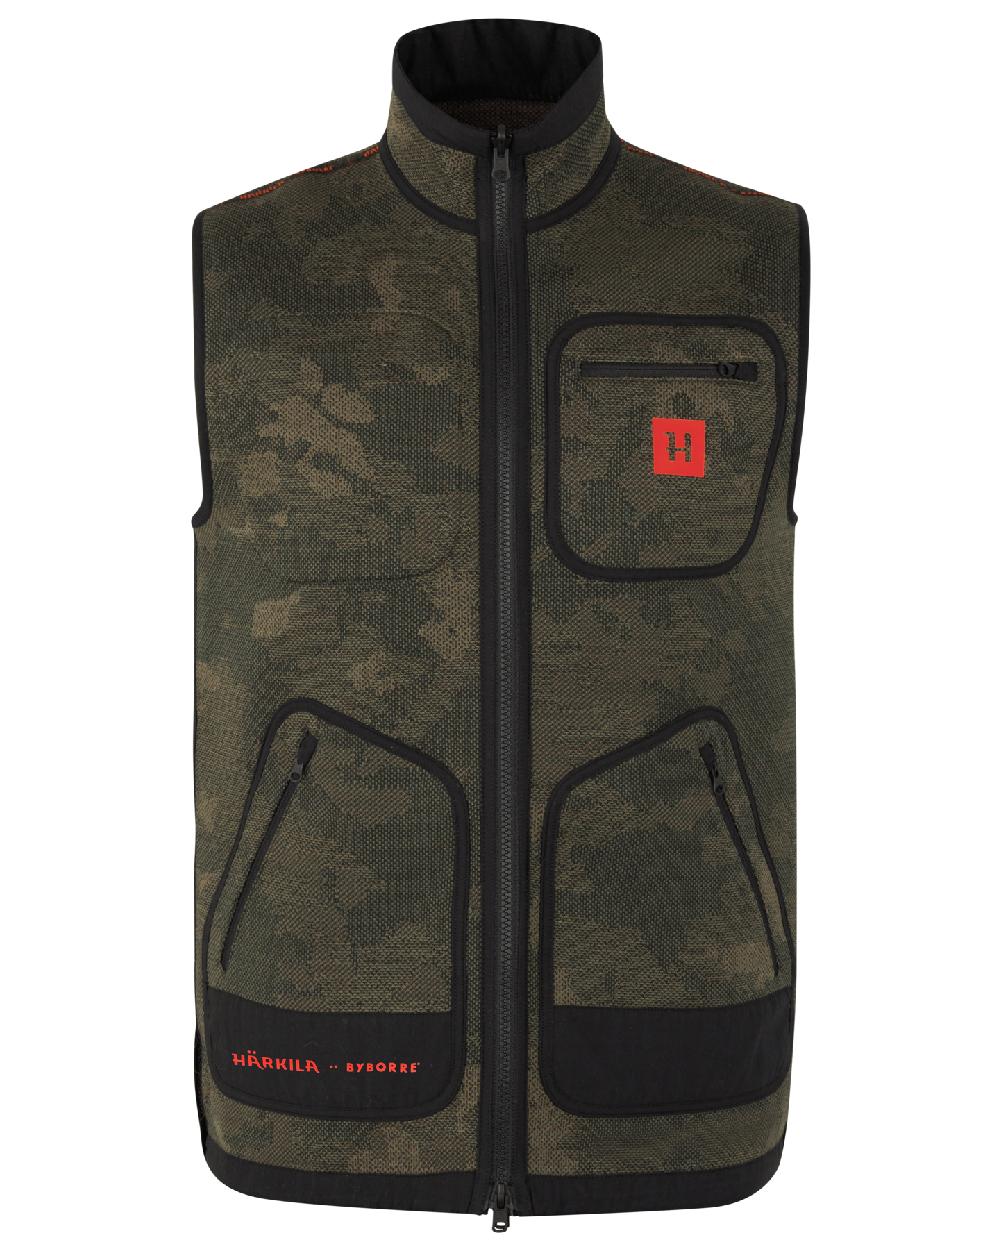 AXIS MSP Limited Edition coloured Harkila Kamko Pro Edition Reversible Waistcoat on white background